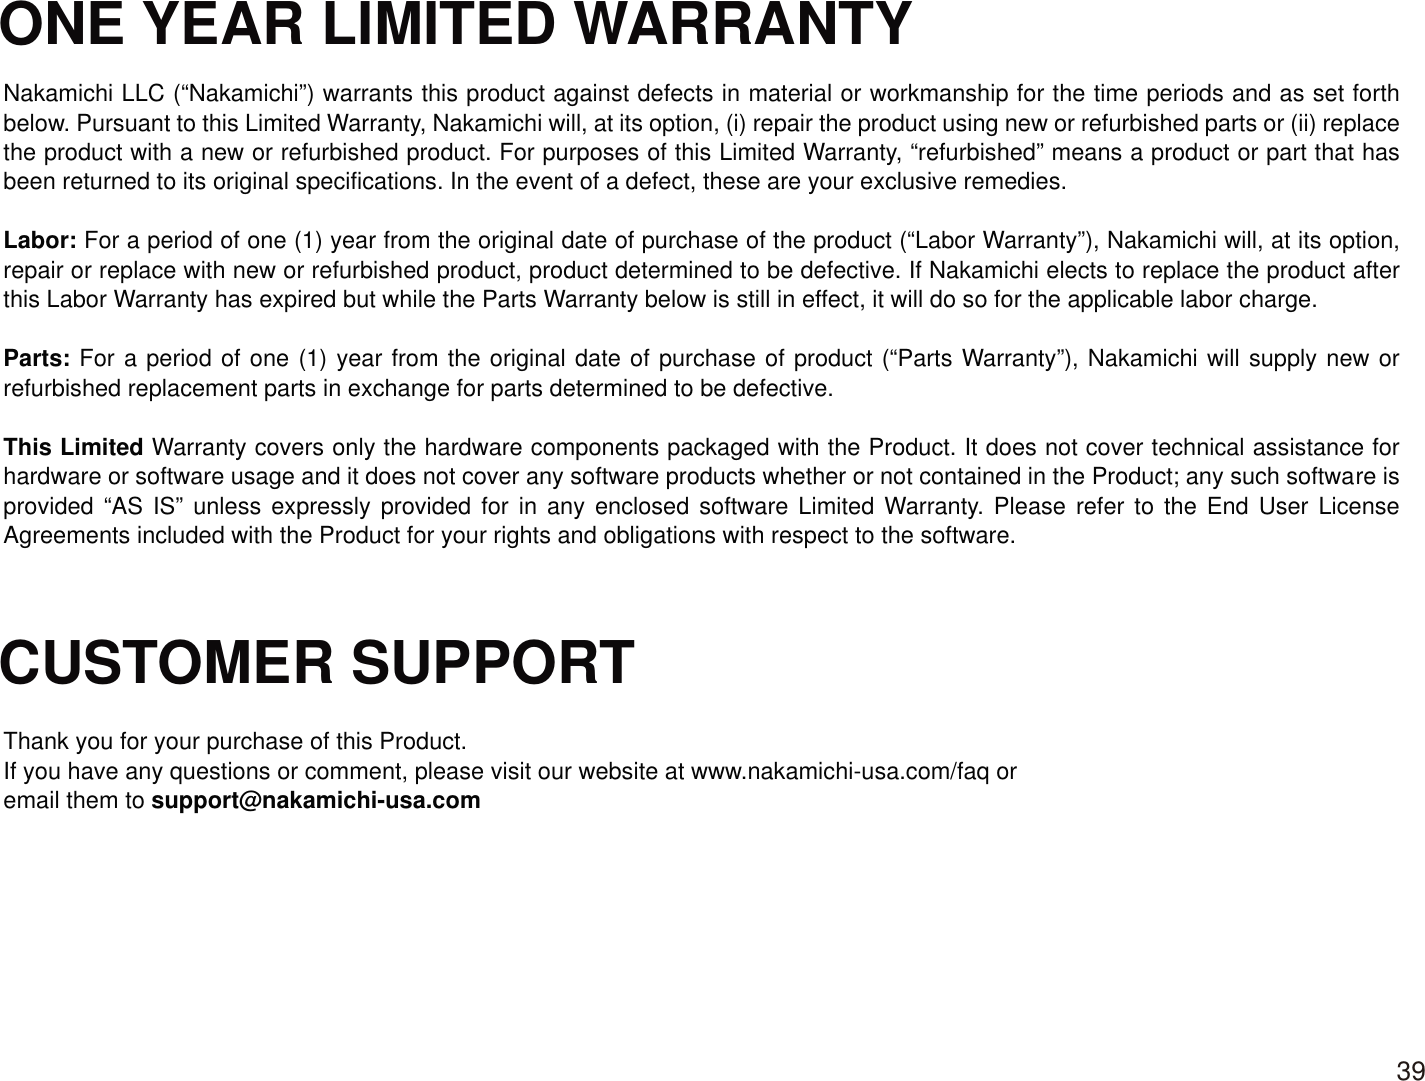 ONE YEAR LIMITED WARRANTYCUSTOMER SUPPORT Nakamichi LLC (“Nakamichi”) warrants this product against defects in material or workmanship for the time periods and as set forth below. Pursuant to this Limited Warranty, Nakamichi will, at its option, (i) repair the product using new or refurbished parts or (ii) replace the product with a new or refurbished product. For purposes of this Limited Warranty, “refurbished” means a product or part that has been returned to its original specifications. In the event of a defect, these are your exclusive remedies. Labor: For a period of one (1) year from the original date of purchase of the product (“Labor Warranty”), Nakamichi will, at its option, repair or replace with new or refurbished product, product determined to be defective. If Nakamichi elects to replace the product after this Labor Warranty has expired but while the Parts Warranty below is still in effect, it will do so for the applicable labor charge. Parts: For a period of one (1) year from the original date of purchase of product (“Parts Warranty”), Nakamichi will supply new or refurbished replacement parts in exchange for parts determined to be defective.This Limited Warranty covers only the hardware components packaged with the Product. It does not cover technical assistance for hardware or software usage and it does not cover any software products whether or not contained in the Product; any such software is provided “AS IS” unless expressly provided for in any enclosed software Limited Warranty. Please refer to the End User License Agreements included with the Product for your rights and obligations with respect to the software. Thank you for your purchase of this Product. If you have any questions or comment, please visit our website at www.nakamichi-usa.com/faq or email them to support@nakamichi-usa.com39